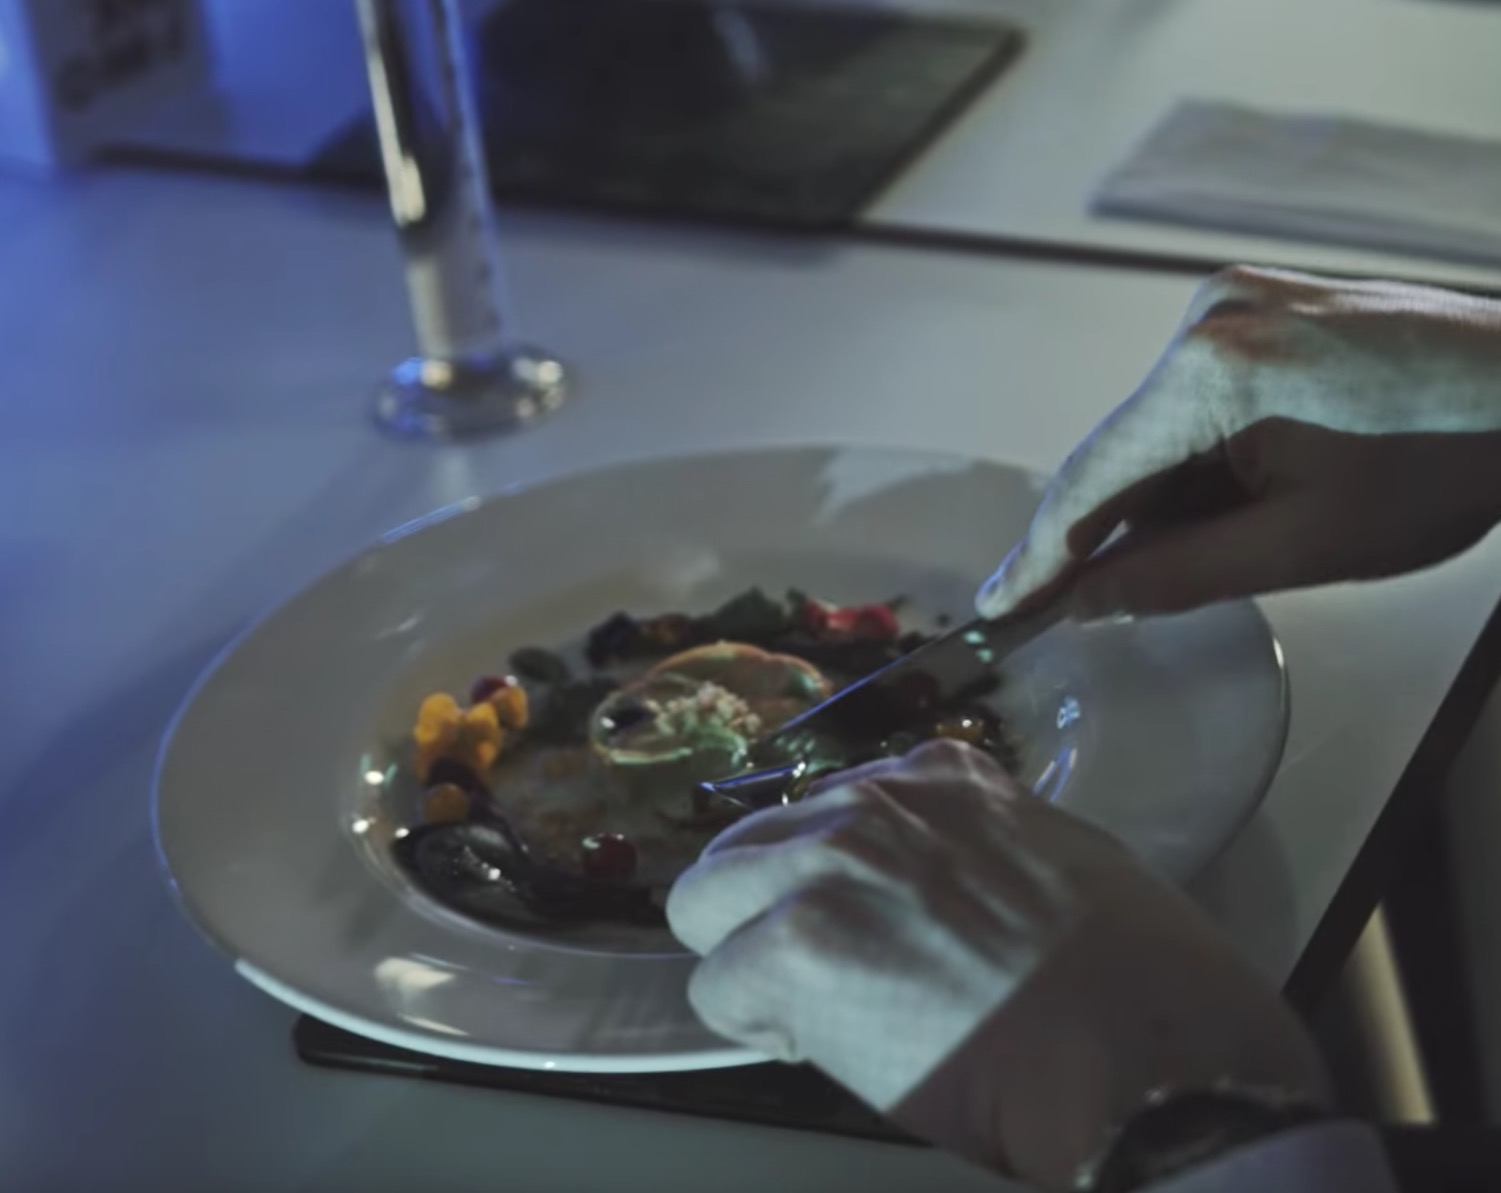  Dining on (partially) 3D printed food 